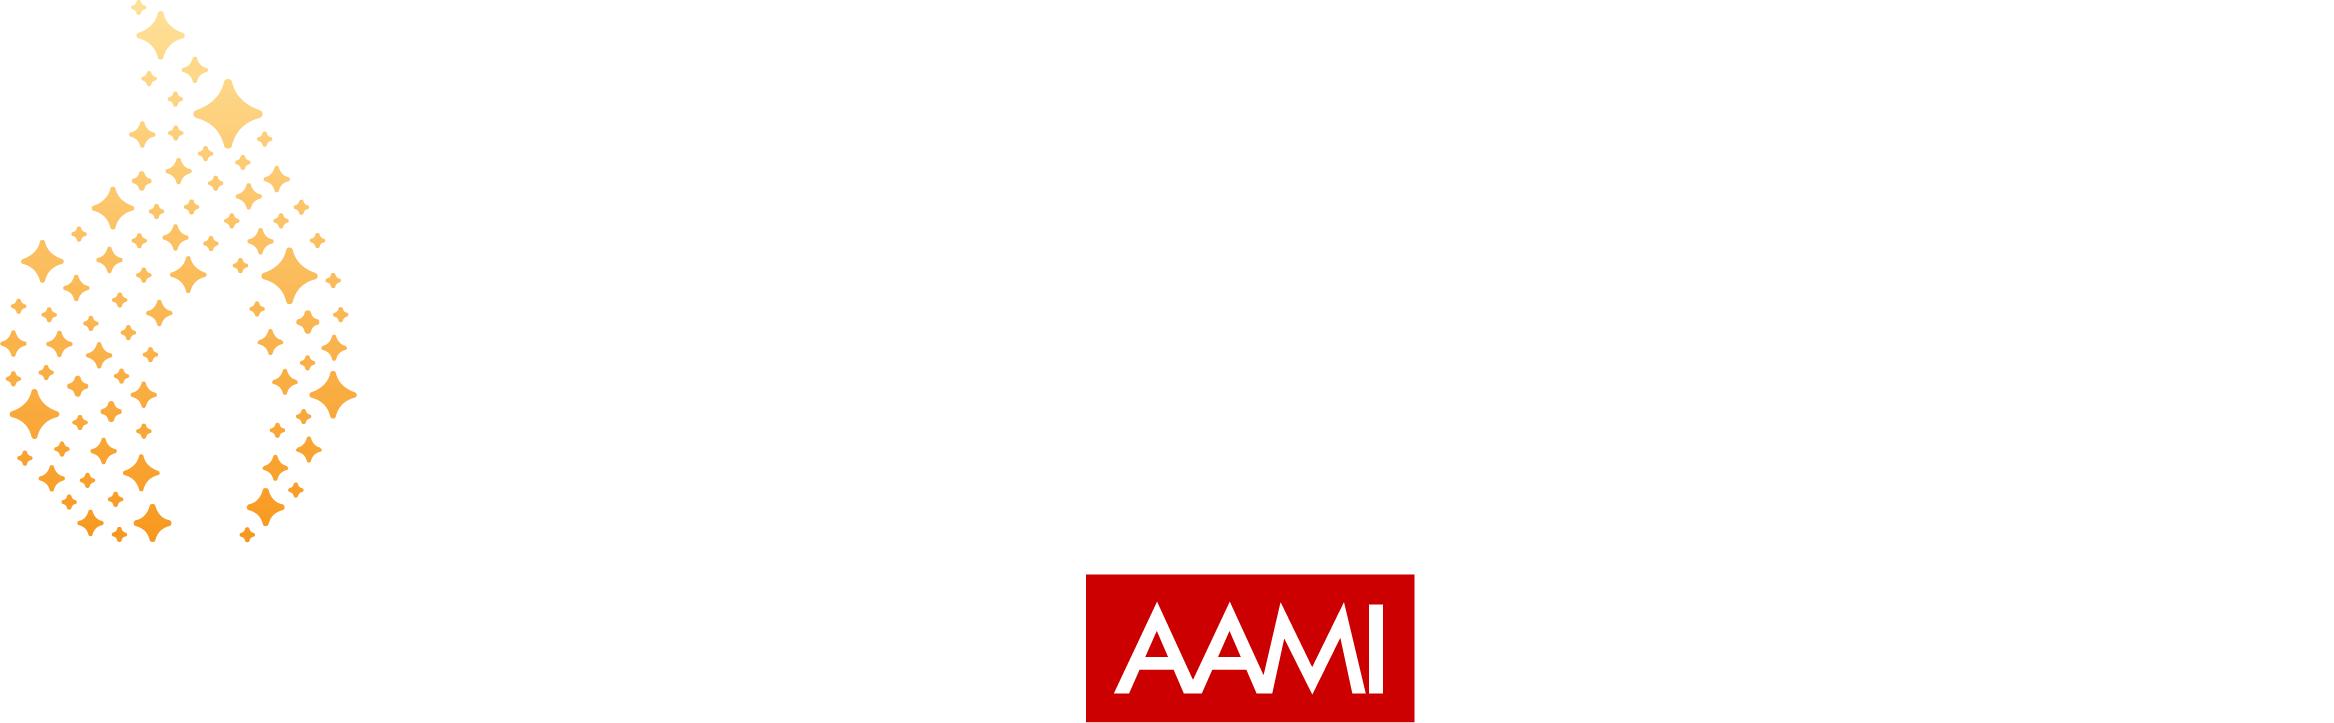 Vision Australia's Carols by Candlelight. Presented by AAMI - logo